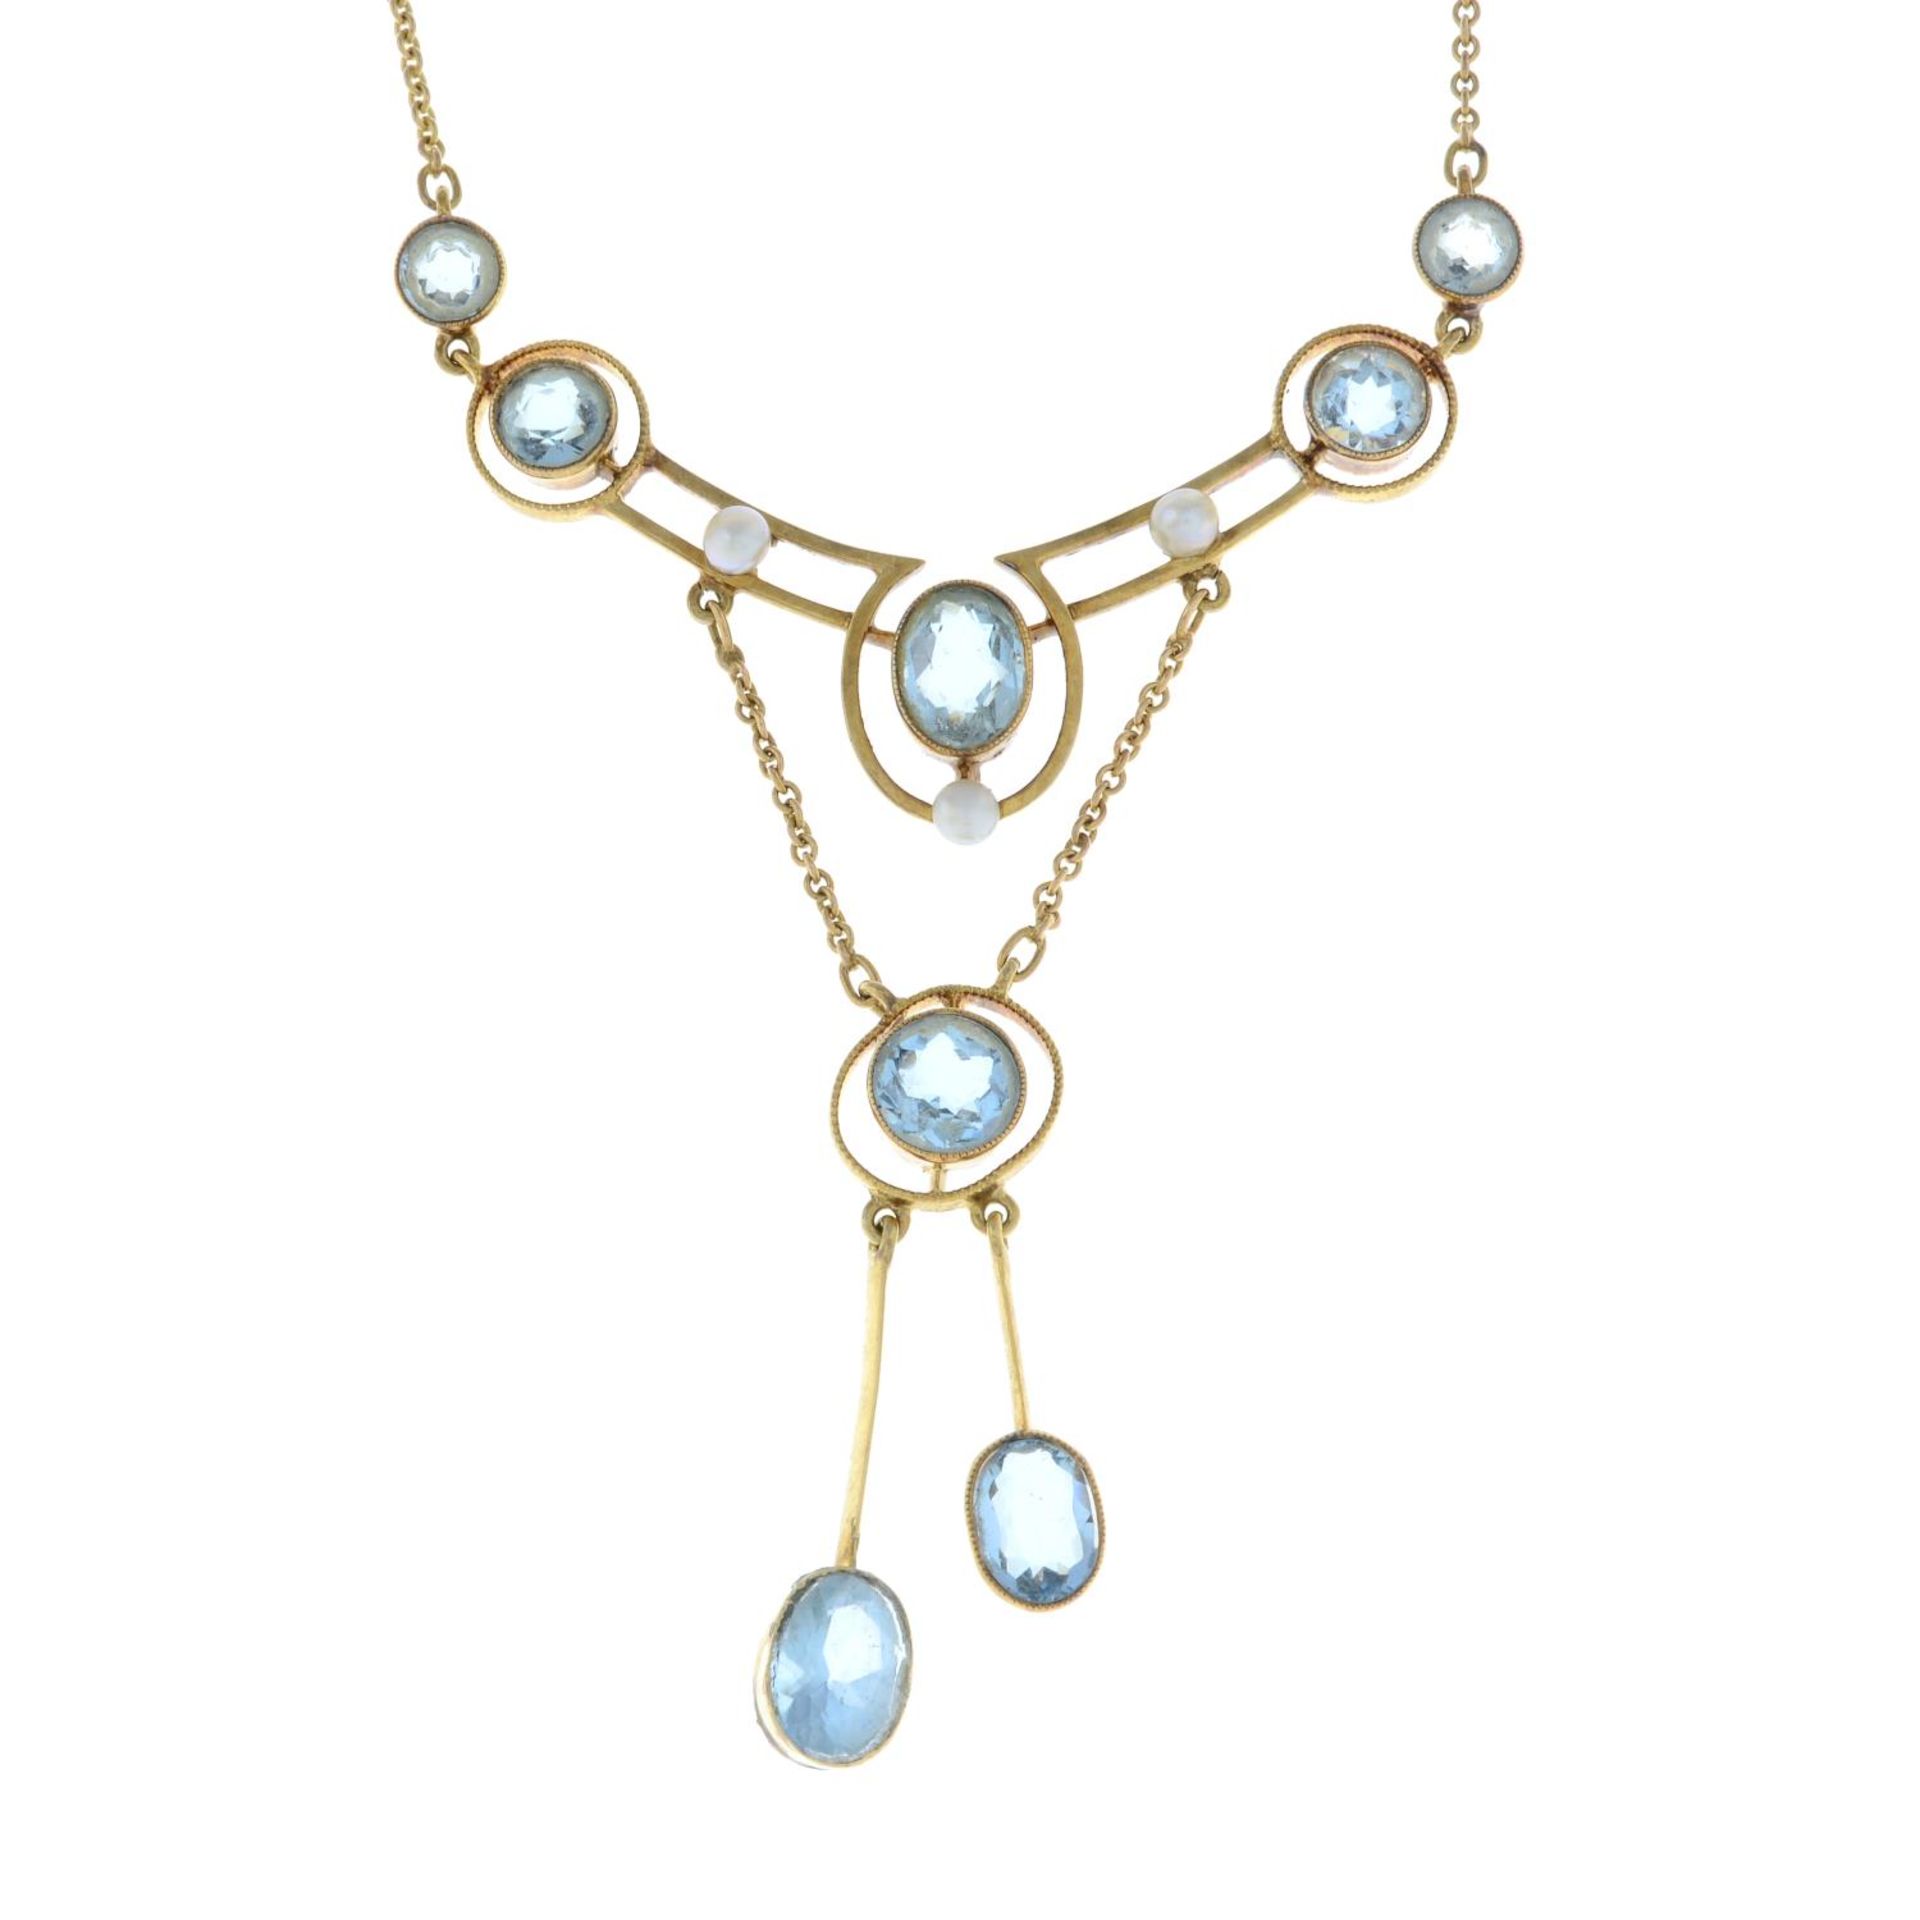 An early 20th century 15ct gold aquamarine and seed pearl drop négligée necklace, by Cropp & Farr.